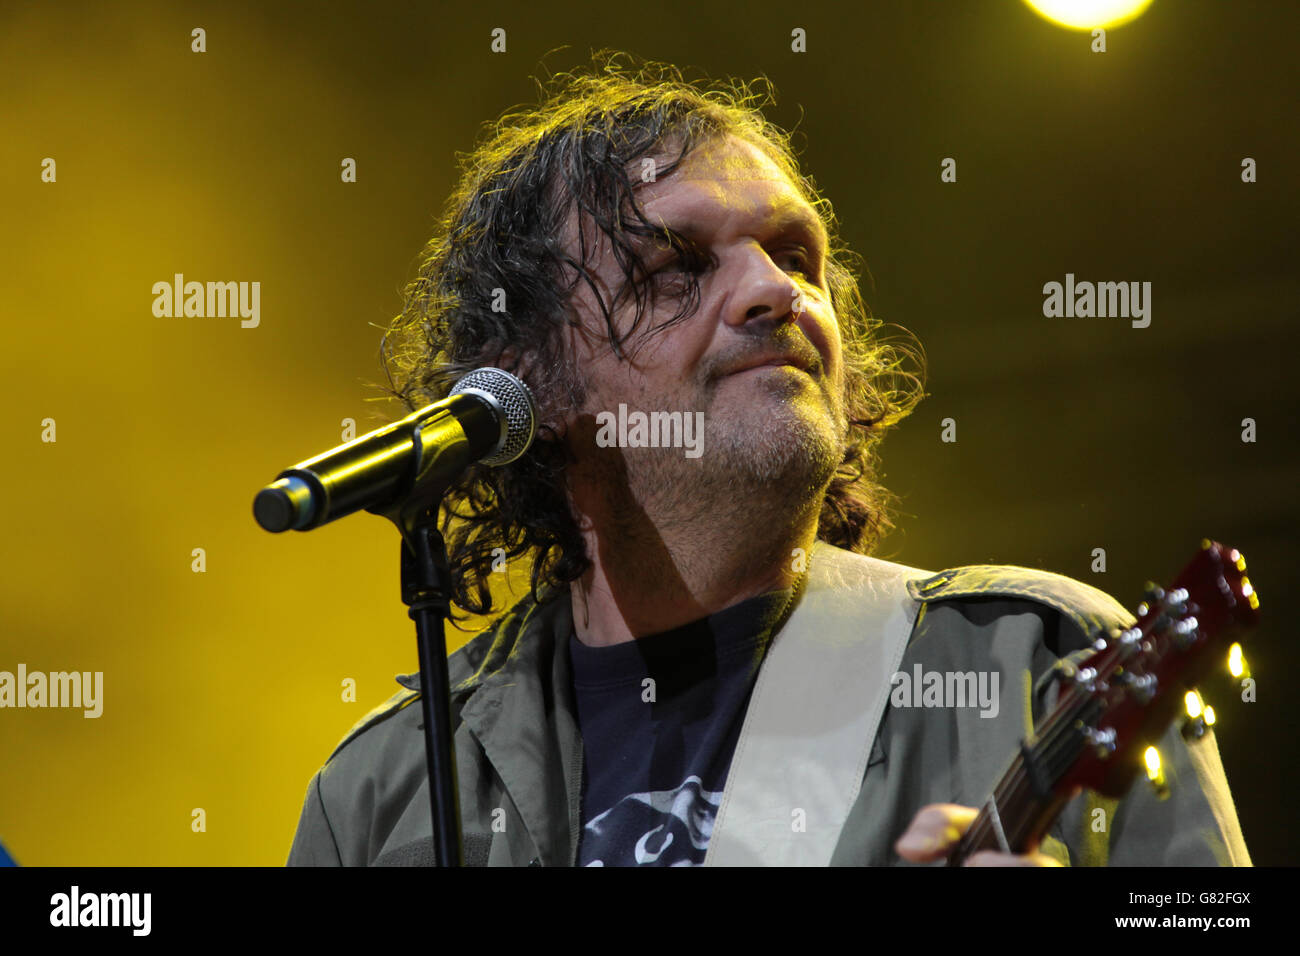 Emir Kusturica and his band The no smoking orchestra perform on stage at Nice Jazz Festival on July 11, 2012 in Nice, France. Stock Photo